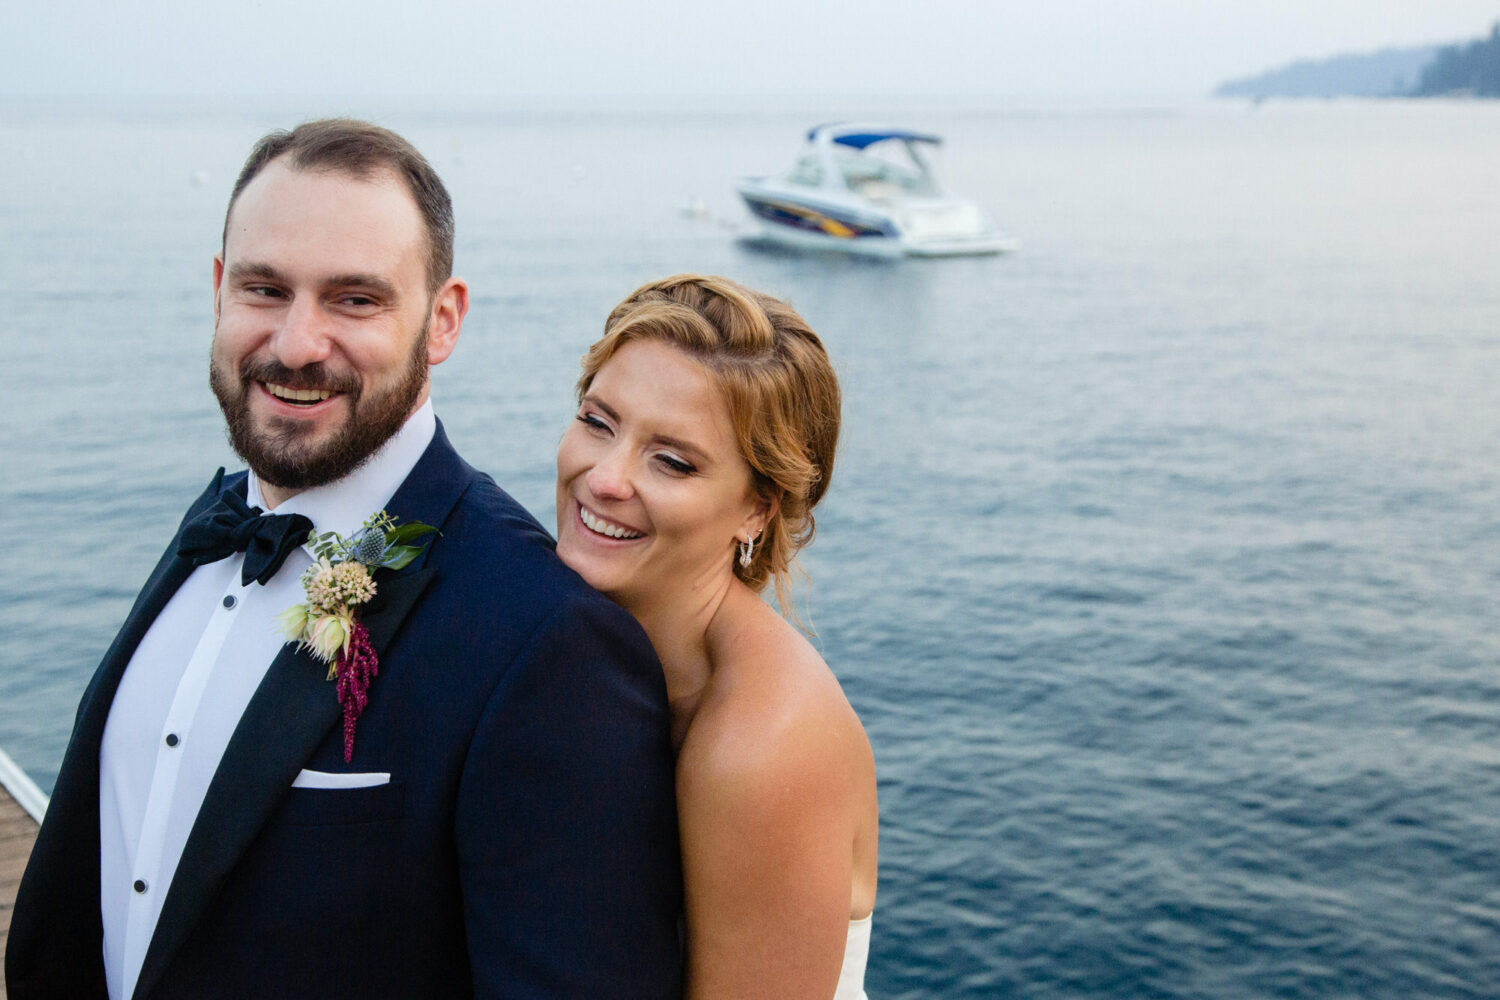 A couple that decided to get married at Gar Woods enjoys a moment together on the pier.